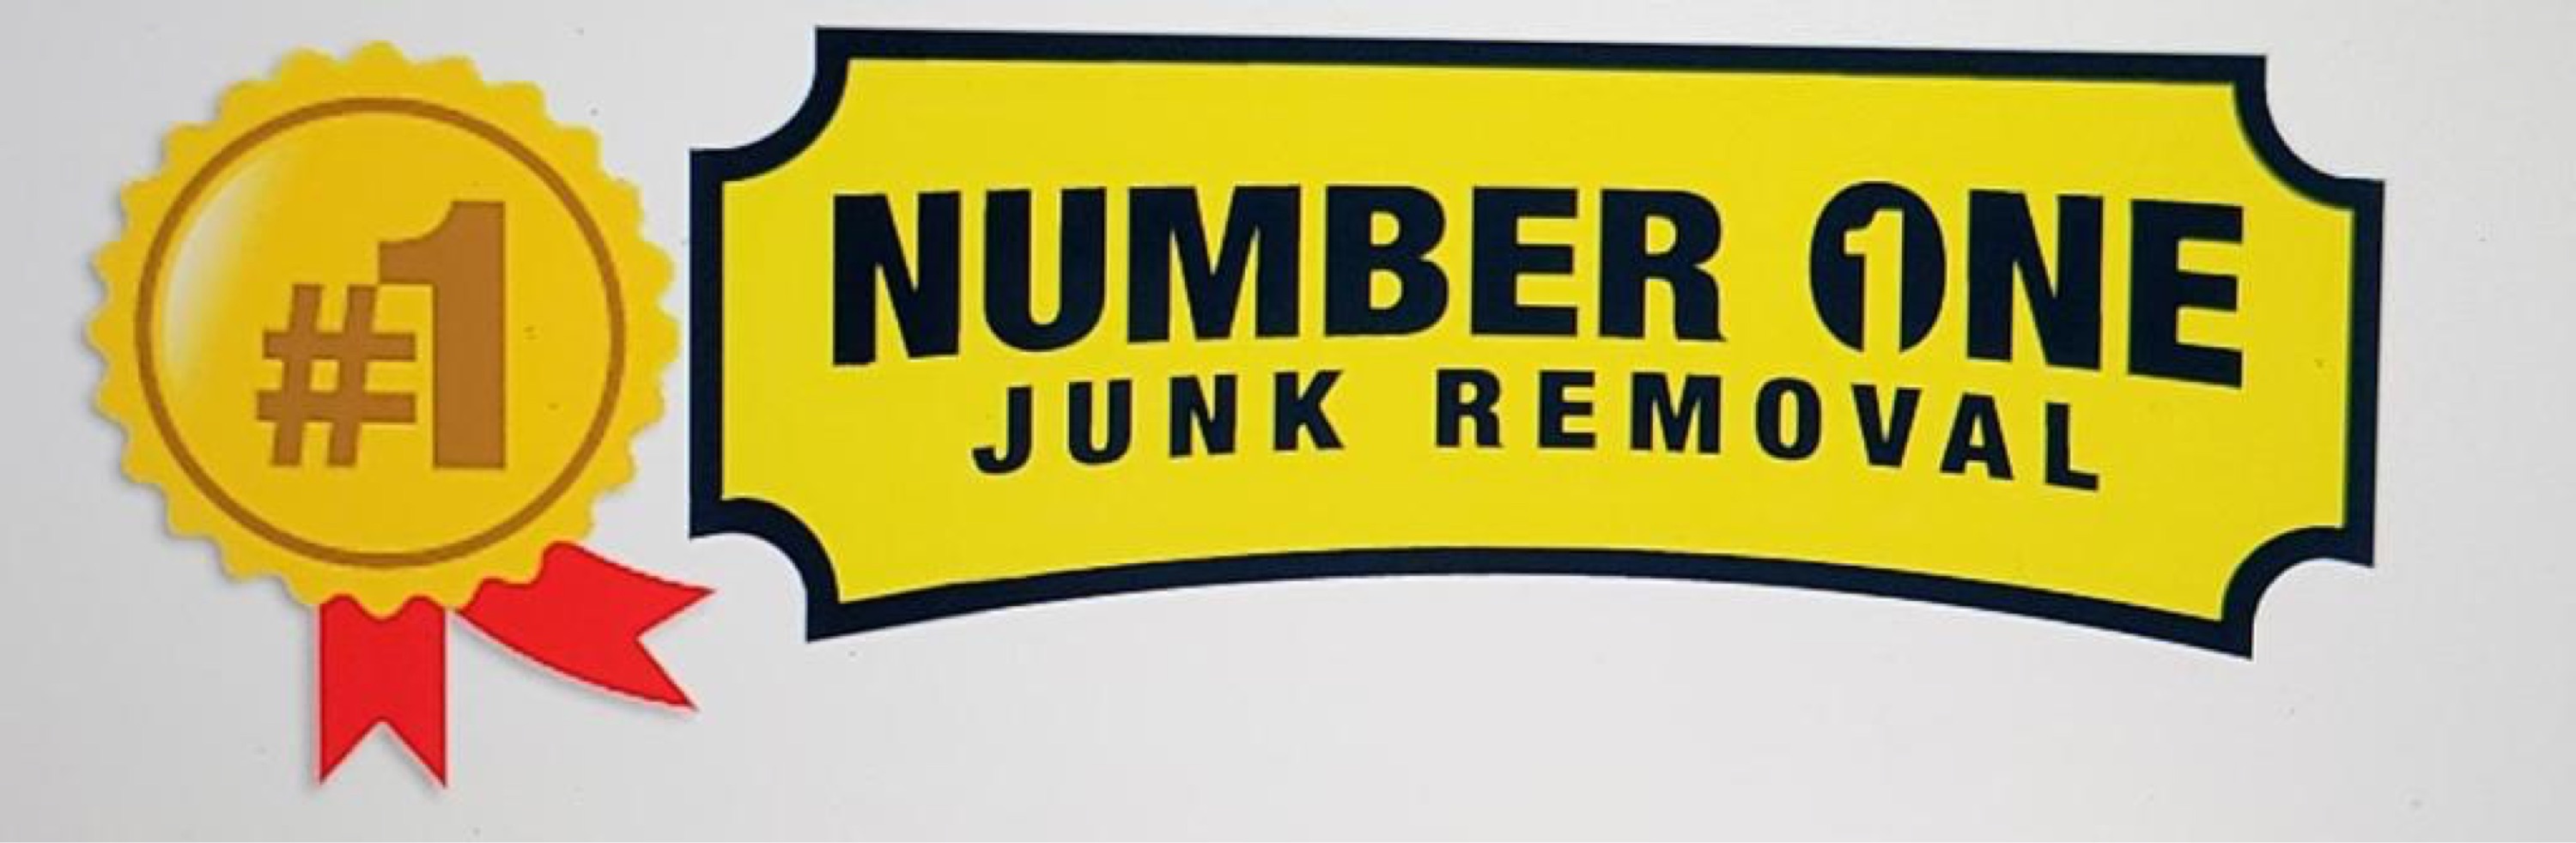 Number One Junk Removal Logo